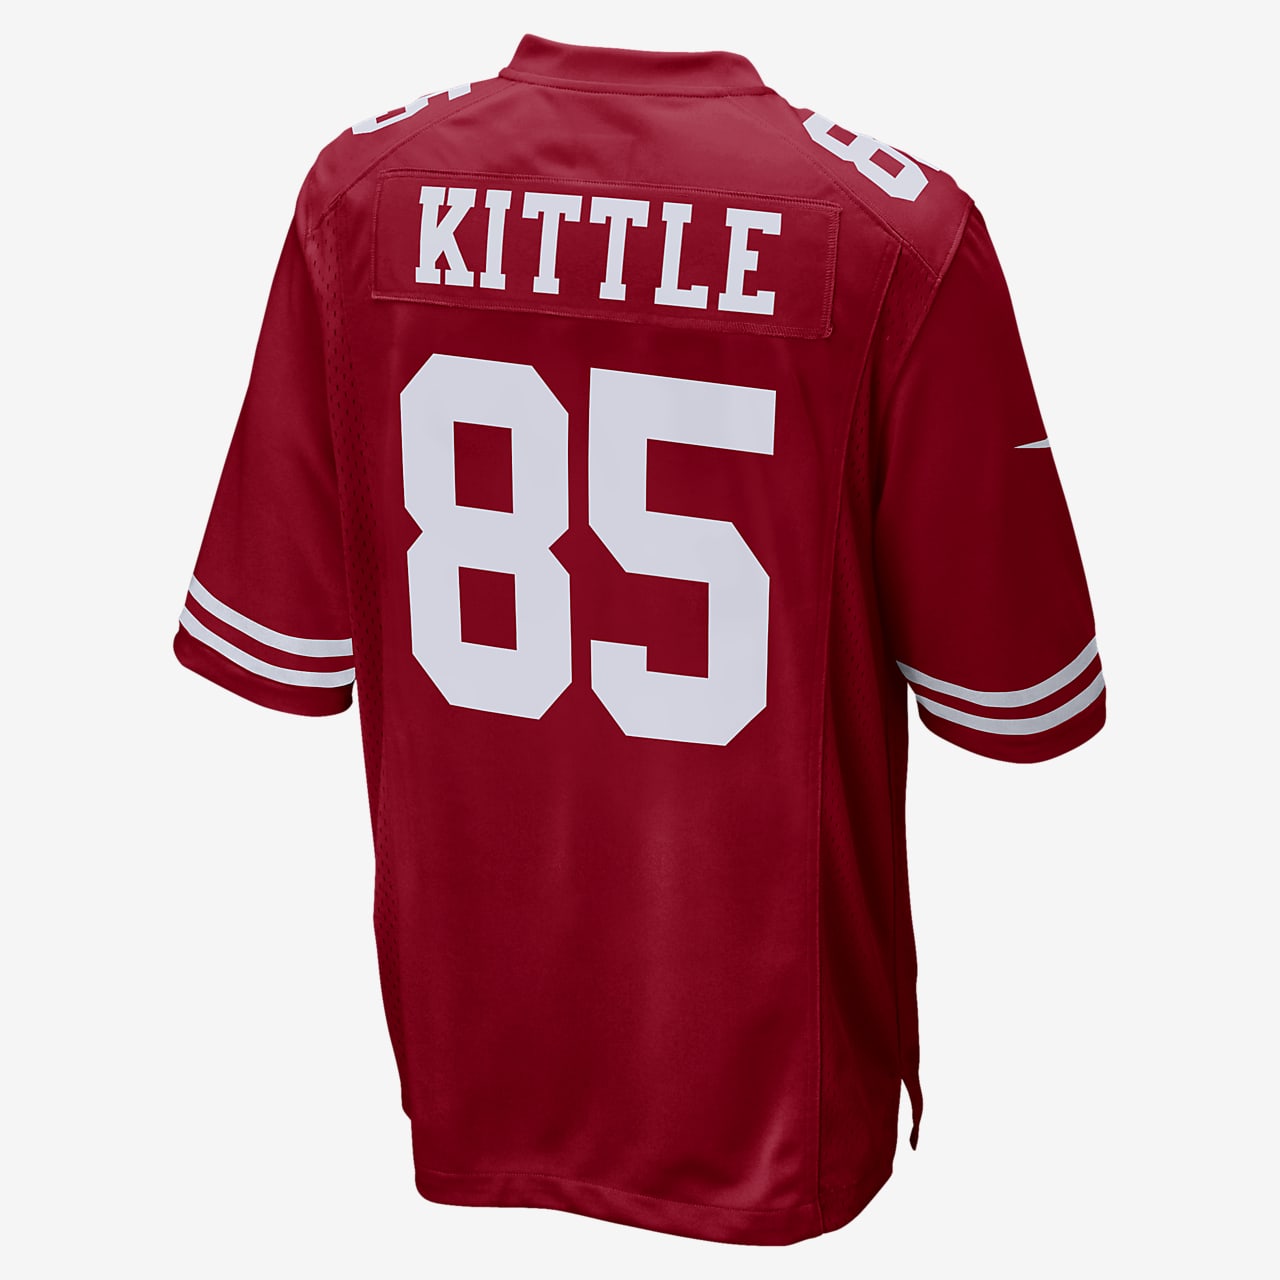 49ers jersey today